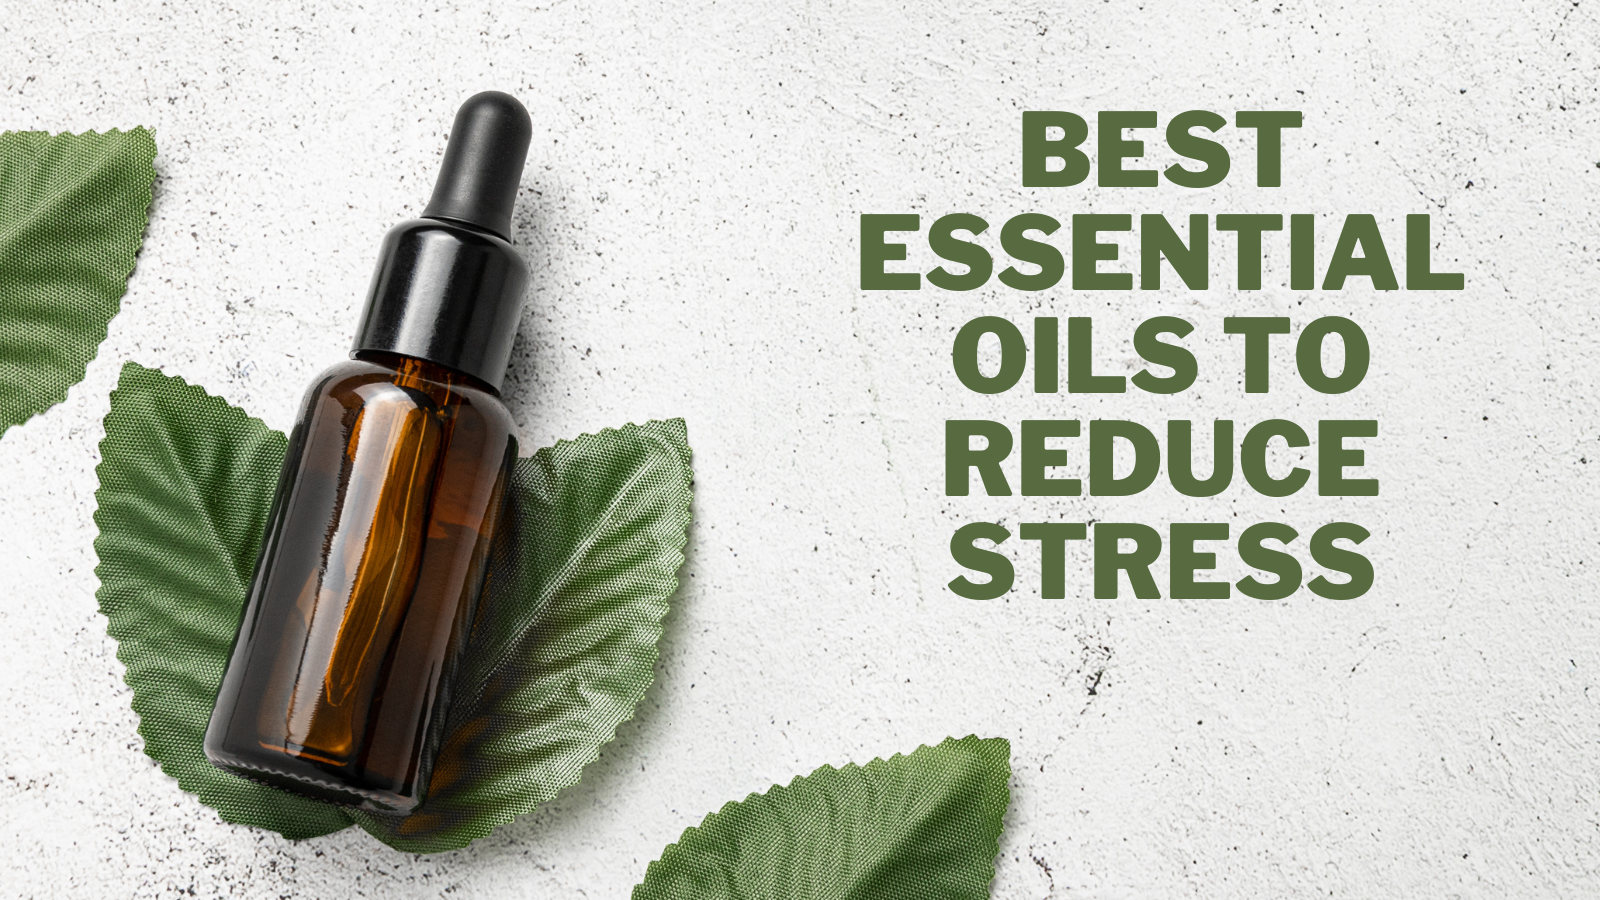 Best Essential Oils To Reduce Stress